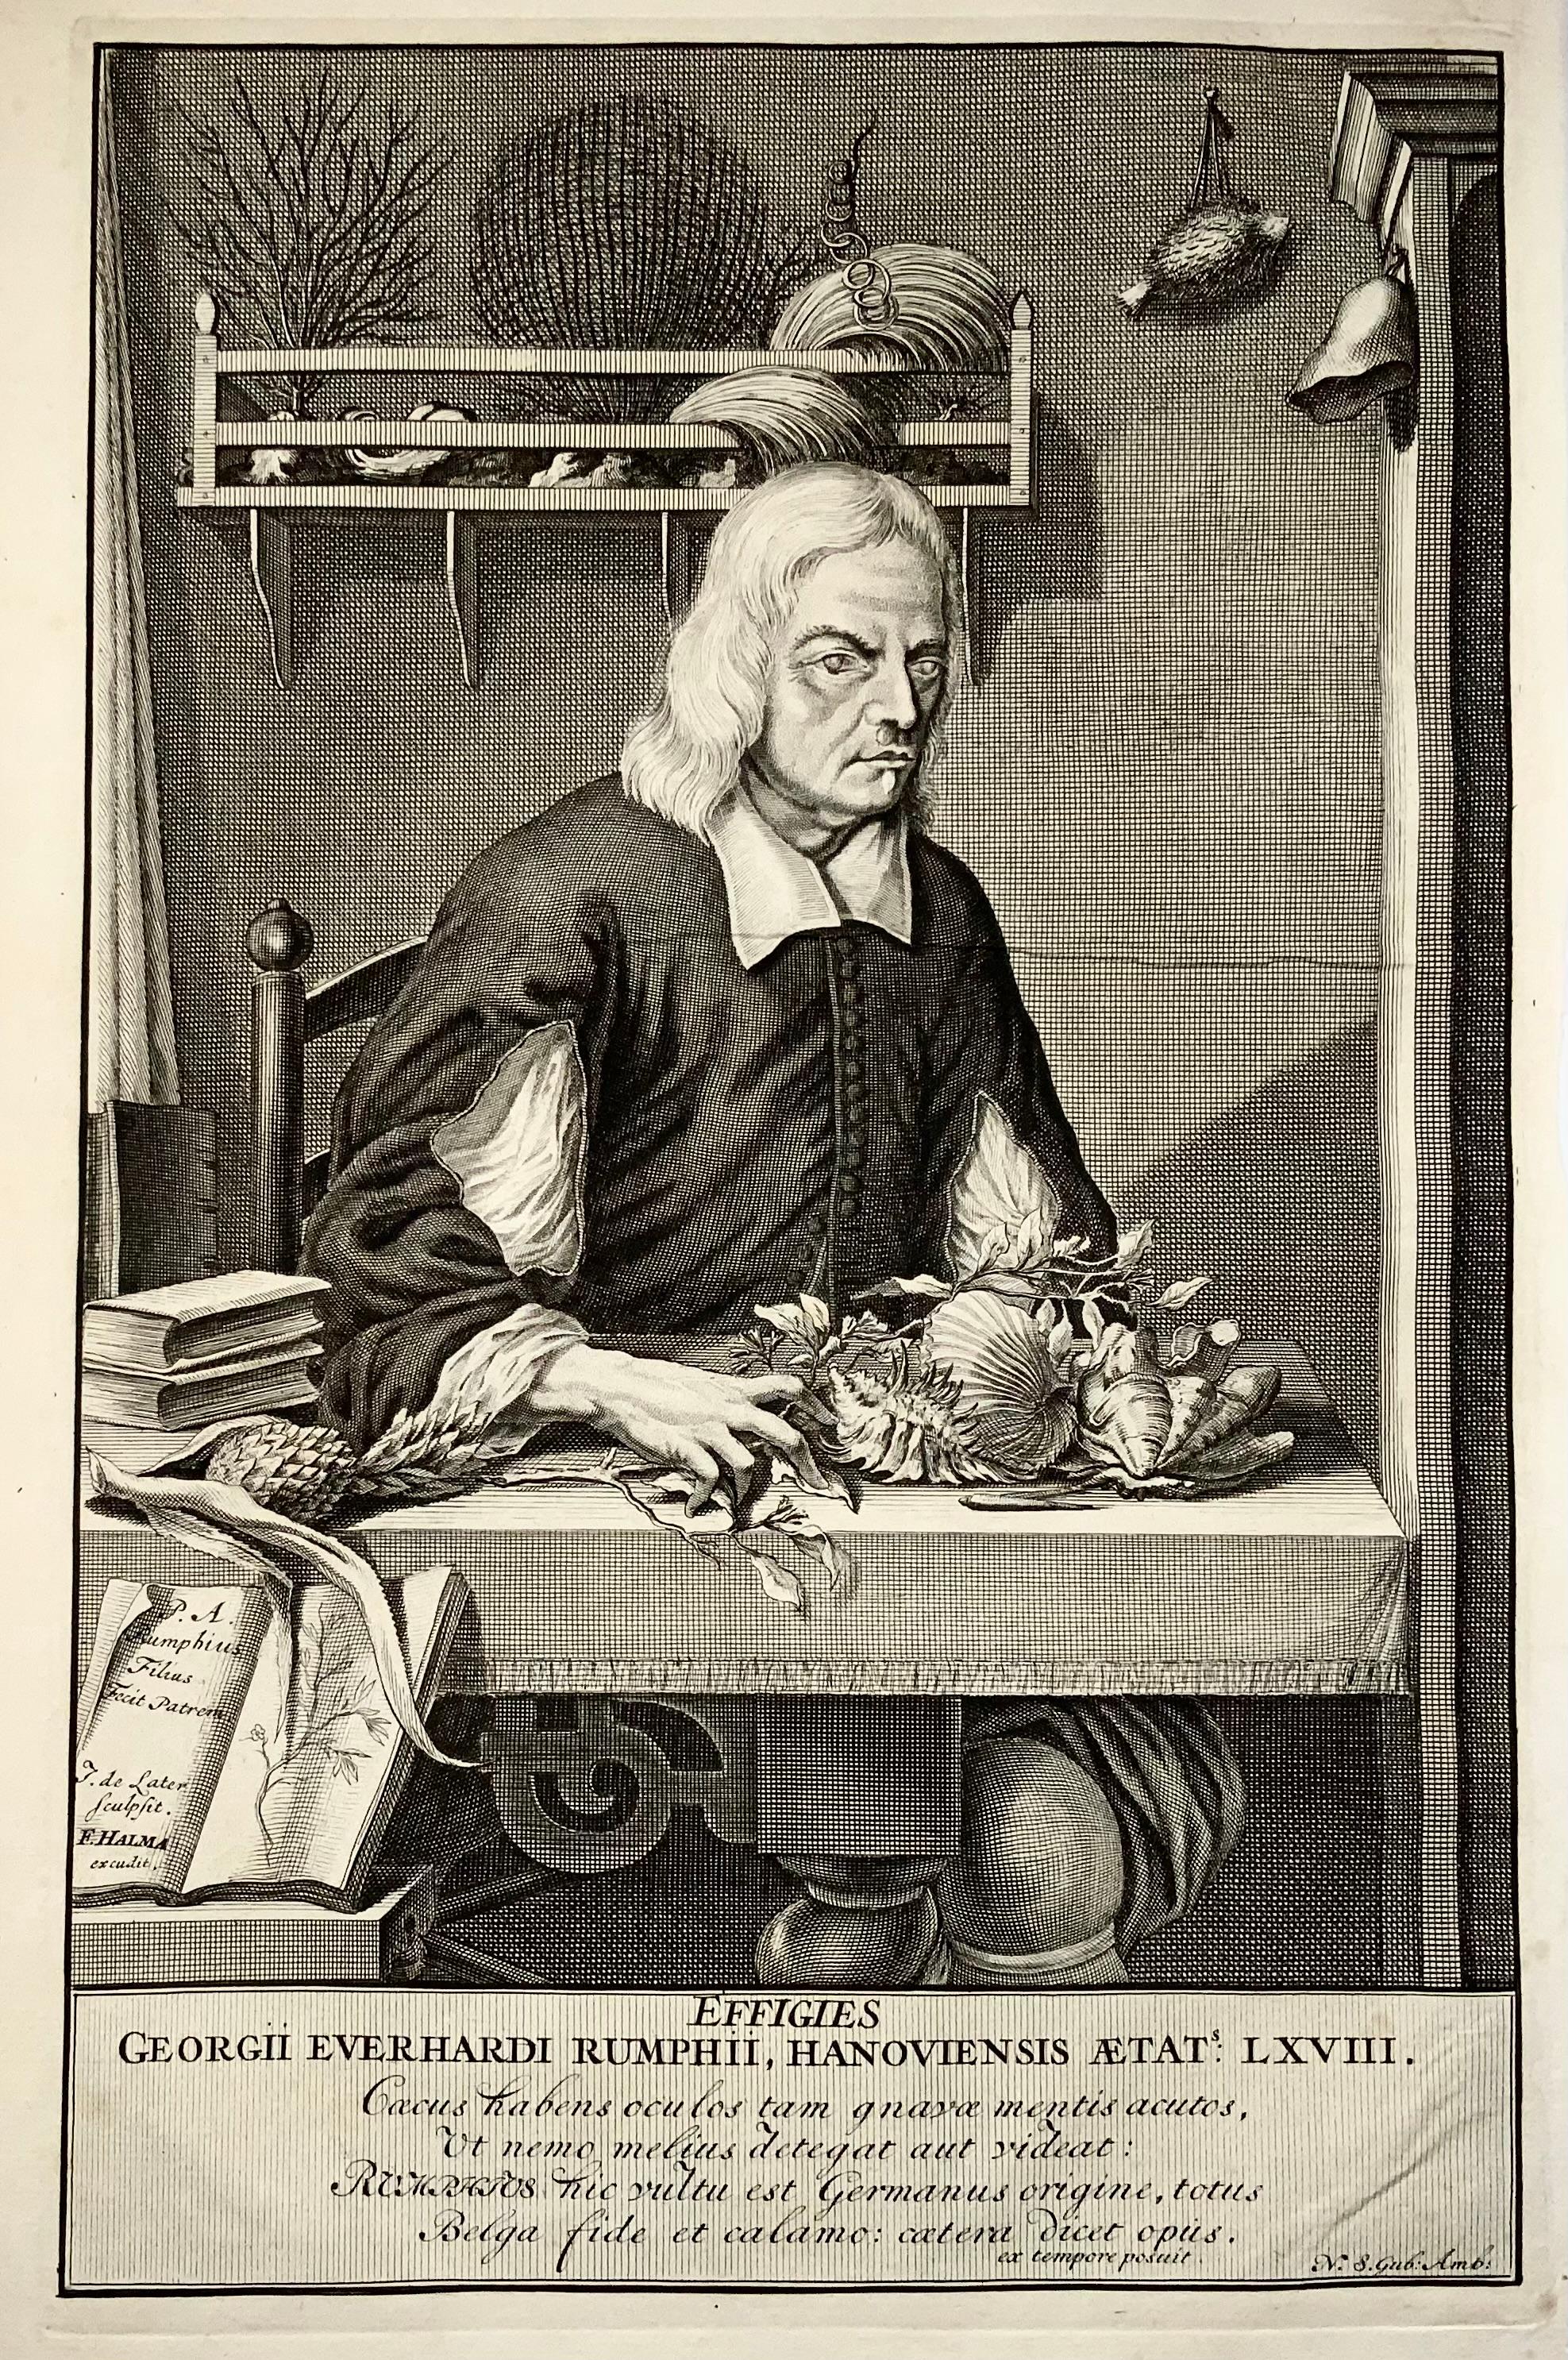 Jacobus de Later

40 x 24.5 cm

Copper engraving

Printed by Francois Halma

Georg Eberhard Rumphius (1627-1702) was a German botanist employed by the Dutch East India Company. He spent much of the second half of the 17th century in Ambon,